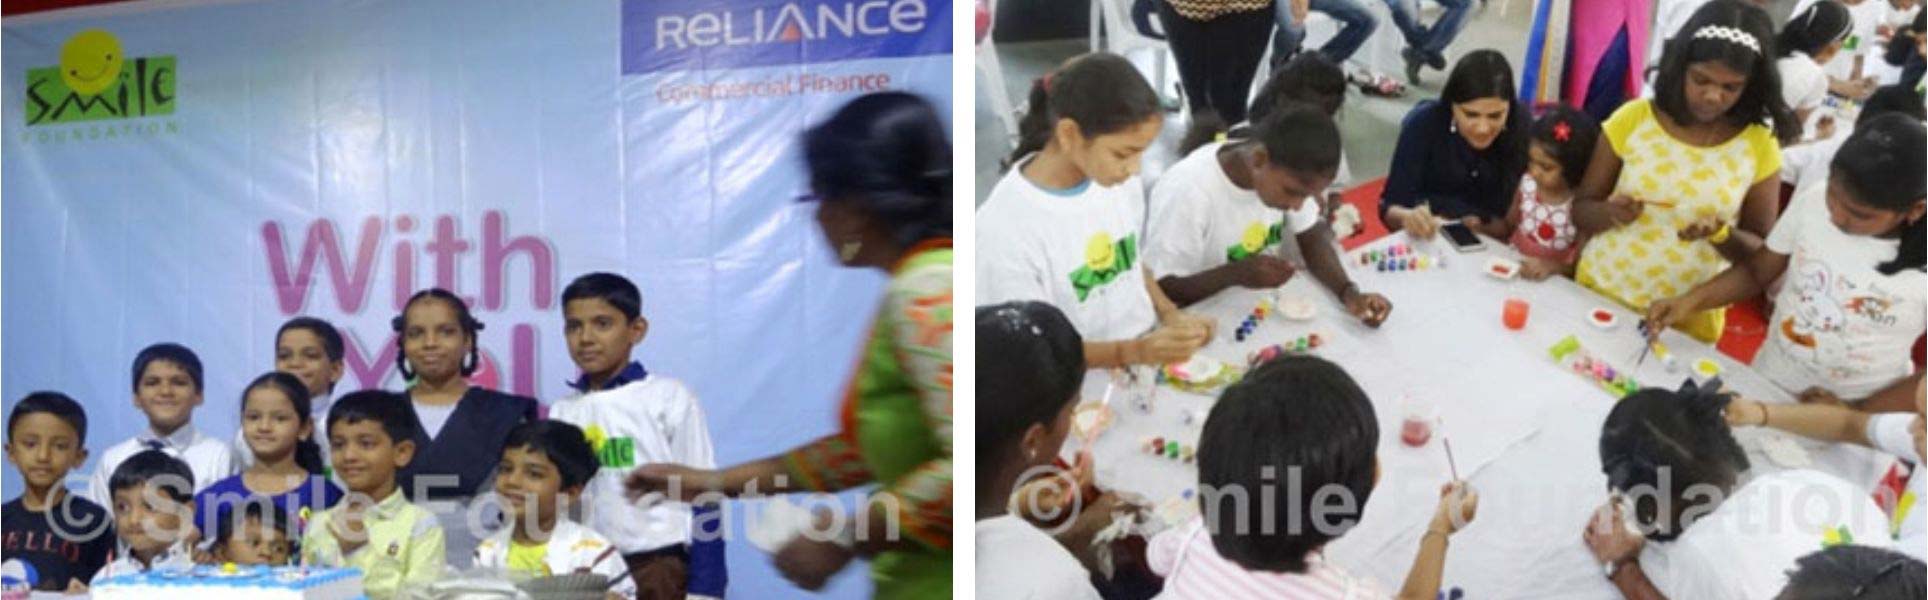 Spreading Smiles with Reliance Capital - Commercial Finance